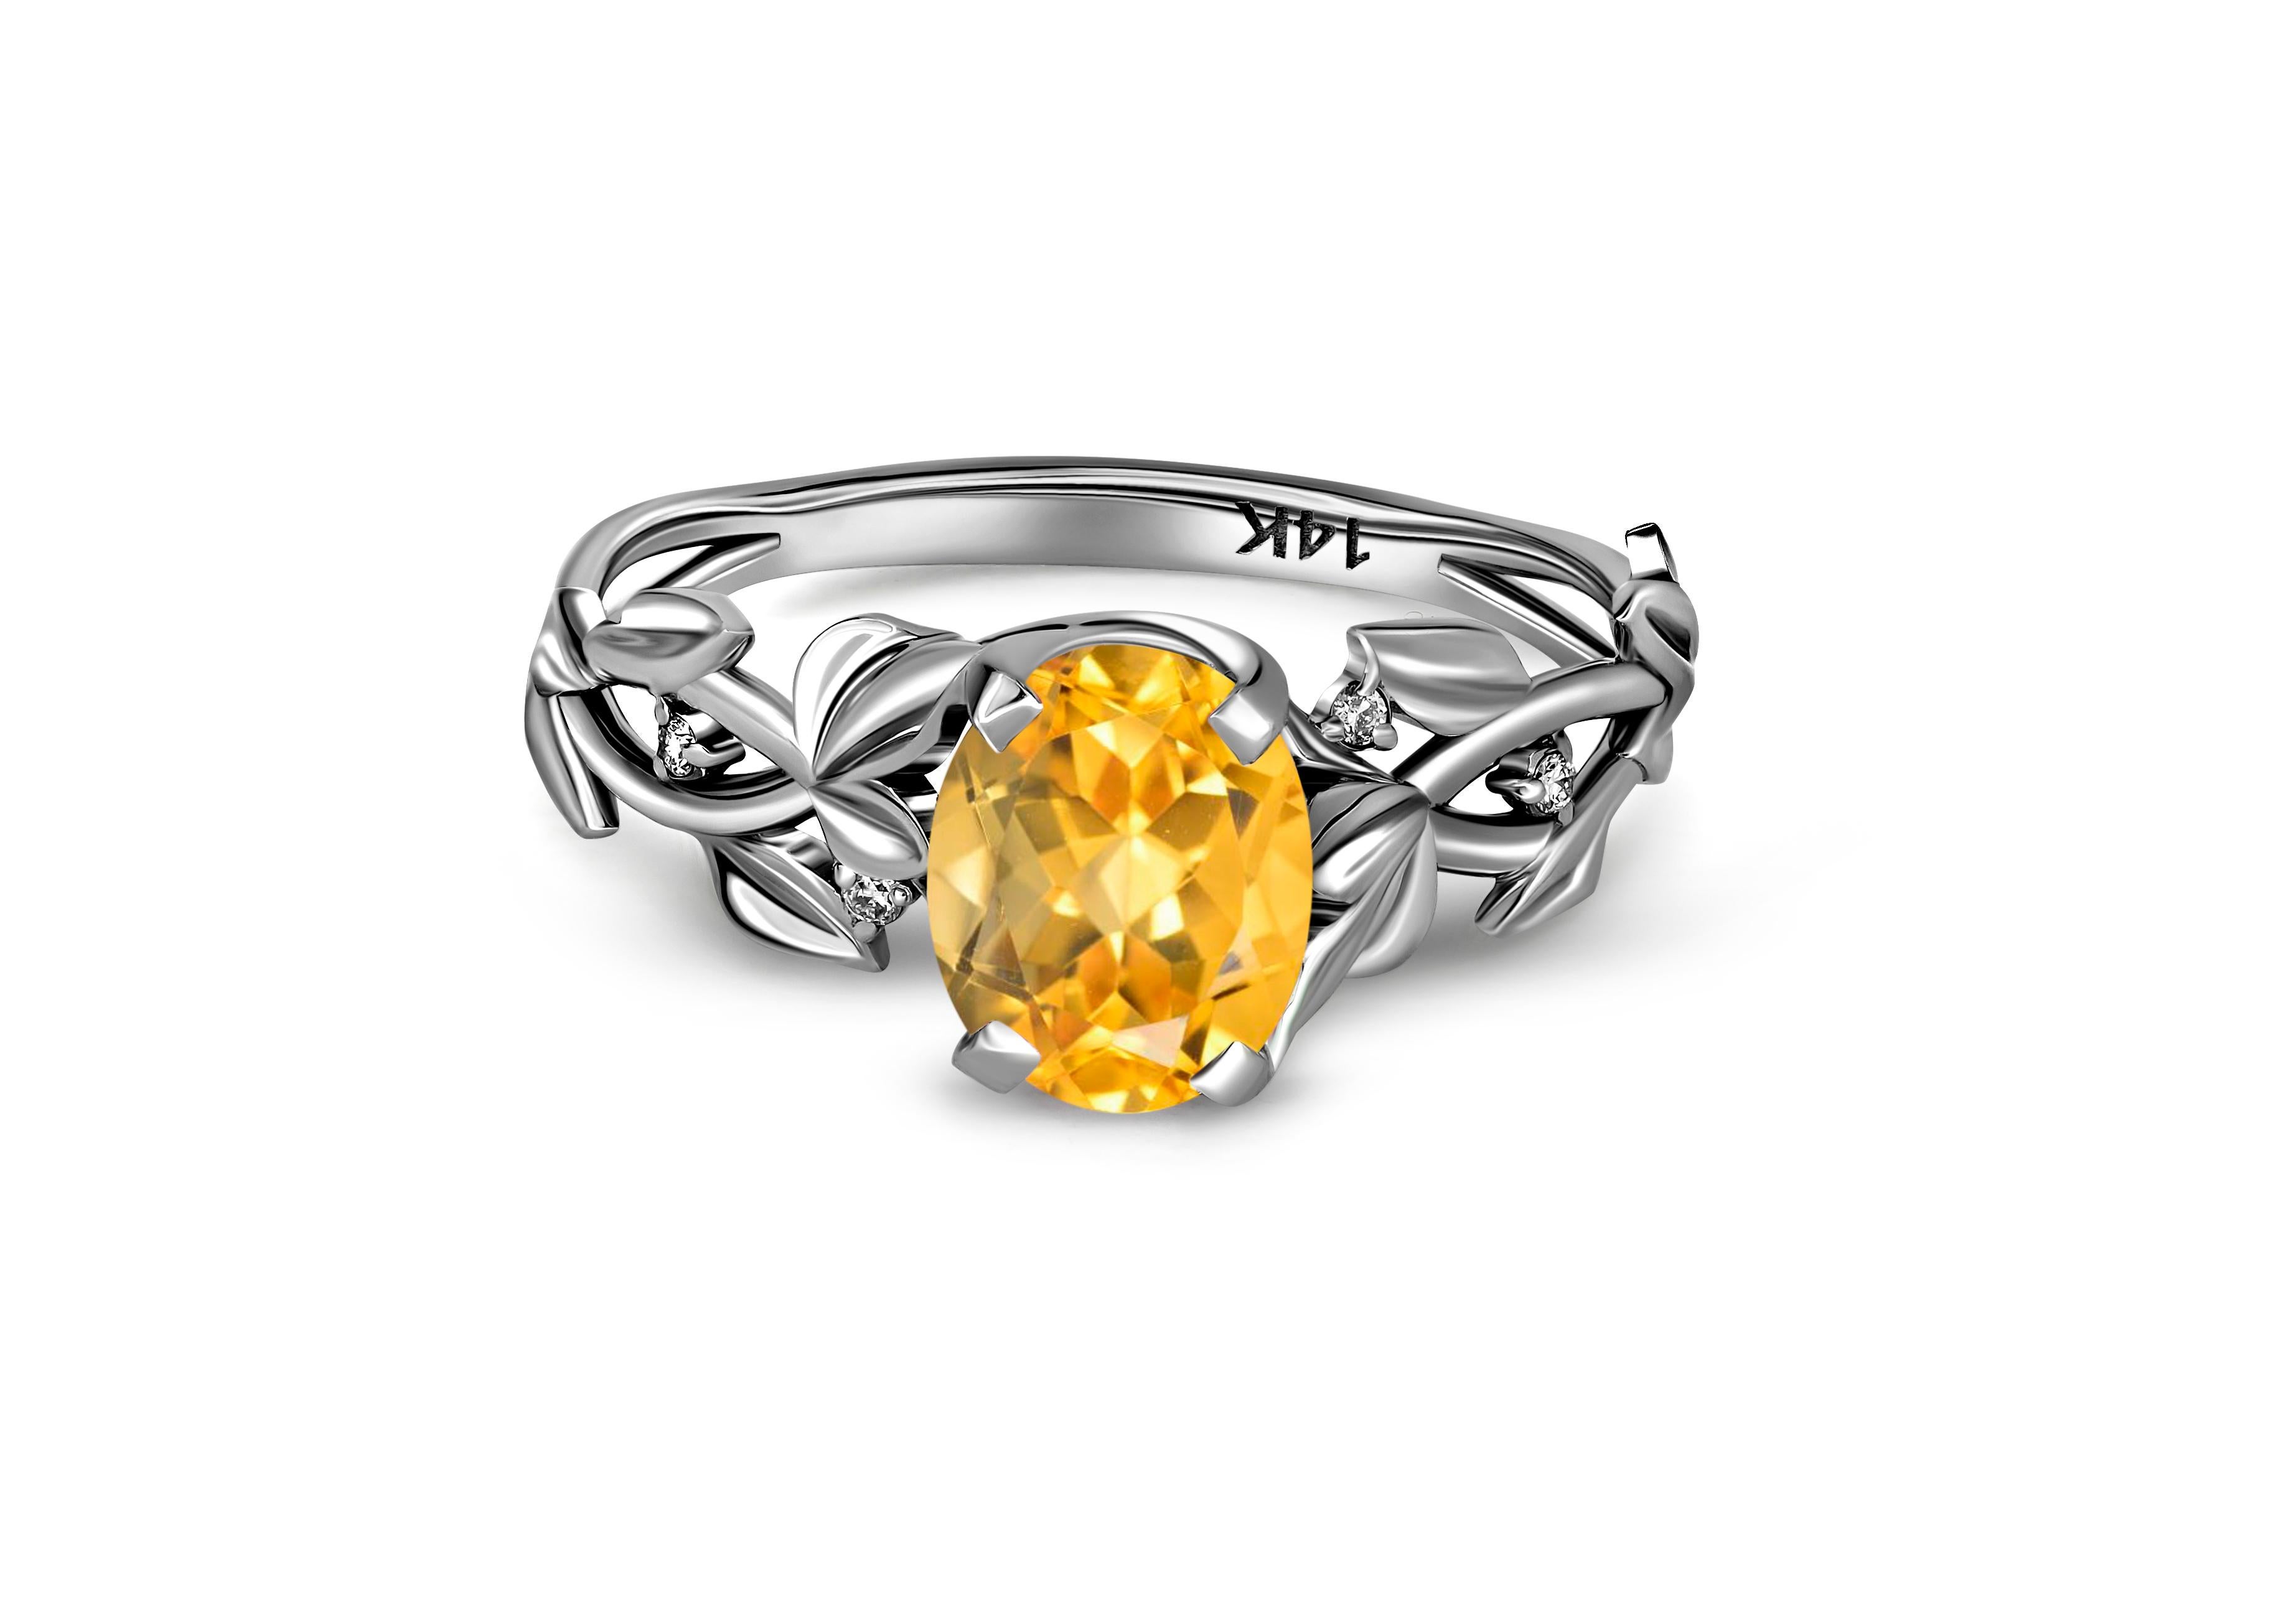 Oval citrine ring. 
14k gold ring with Citrine. Minimalist citrine ring. Citrine engagement ring. Citrine promise ring.

Metal: 14k  gold 
Weight  2.38 gr. depends from sizeю

Gemstones: 
Citrine: oval cabochon shape, color yellow, VS transparent